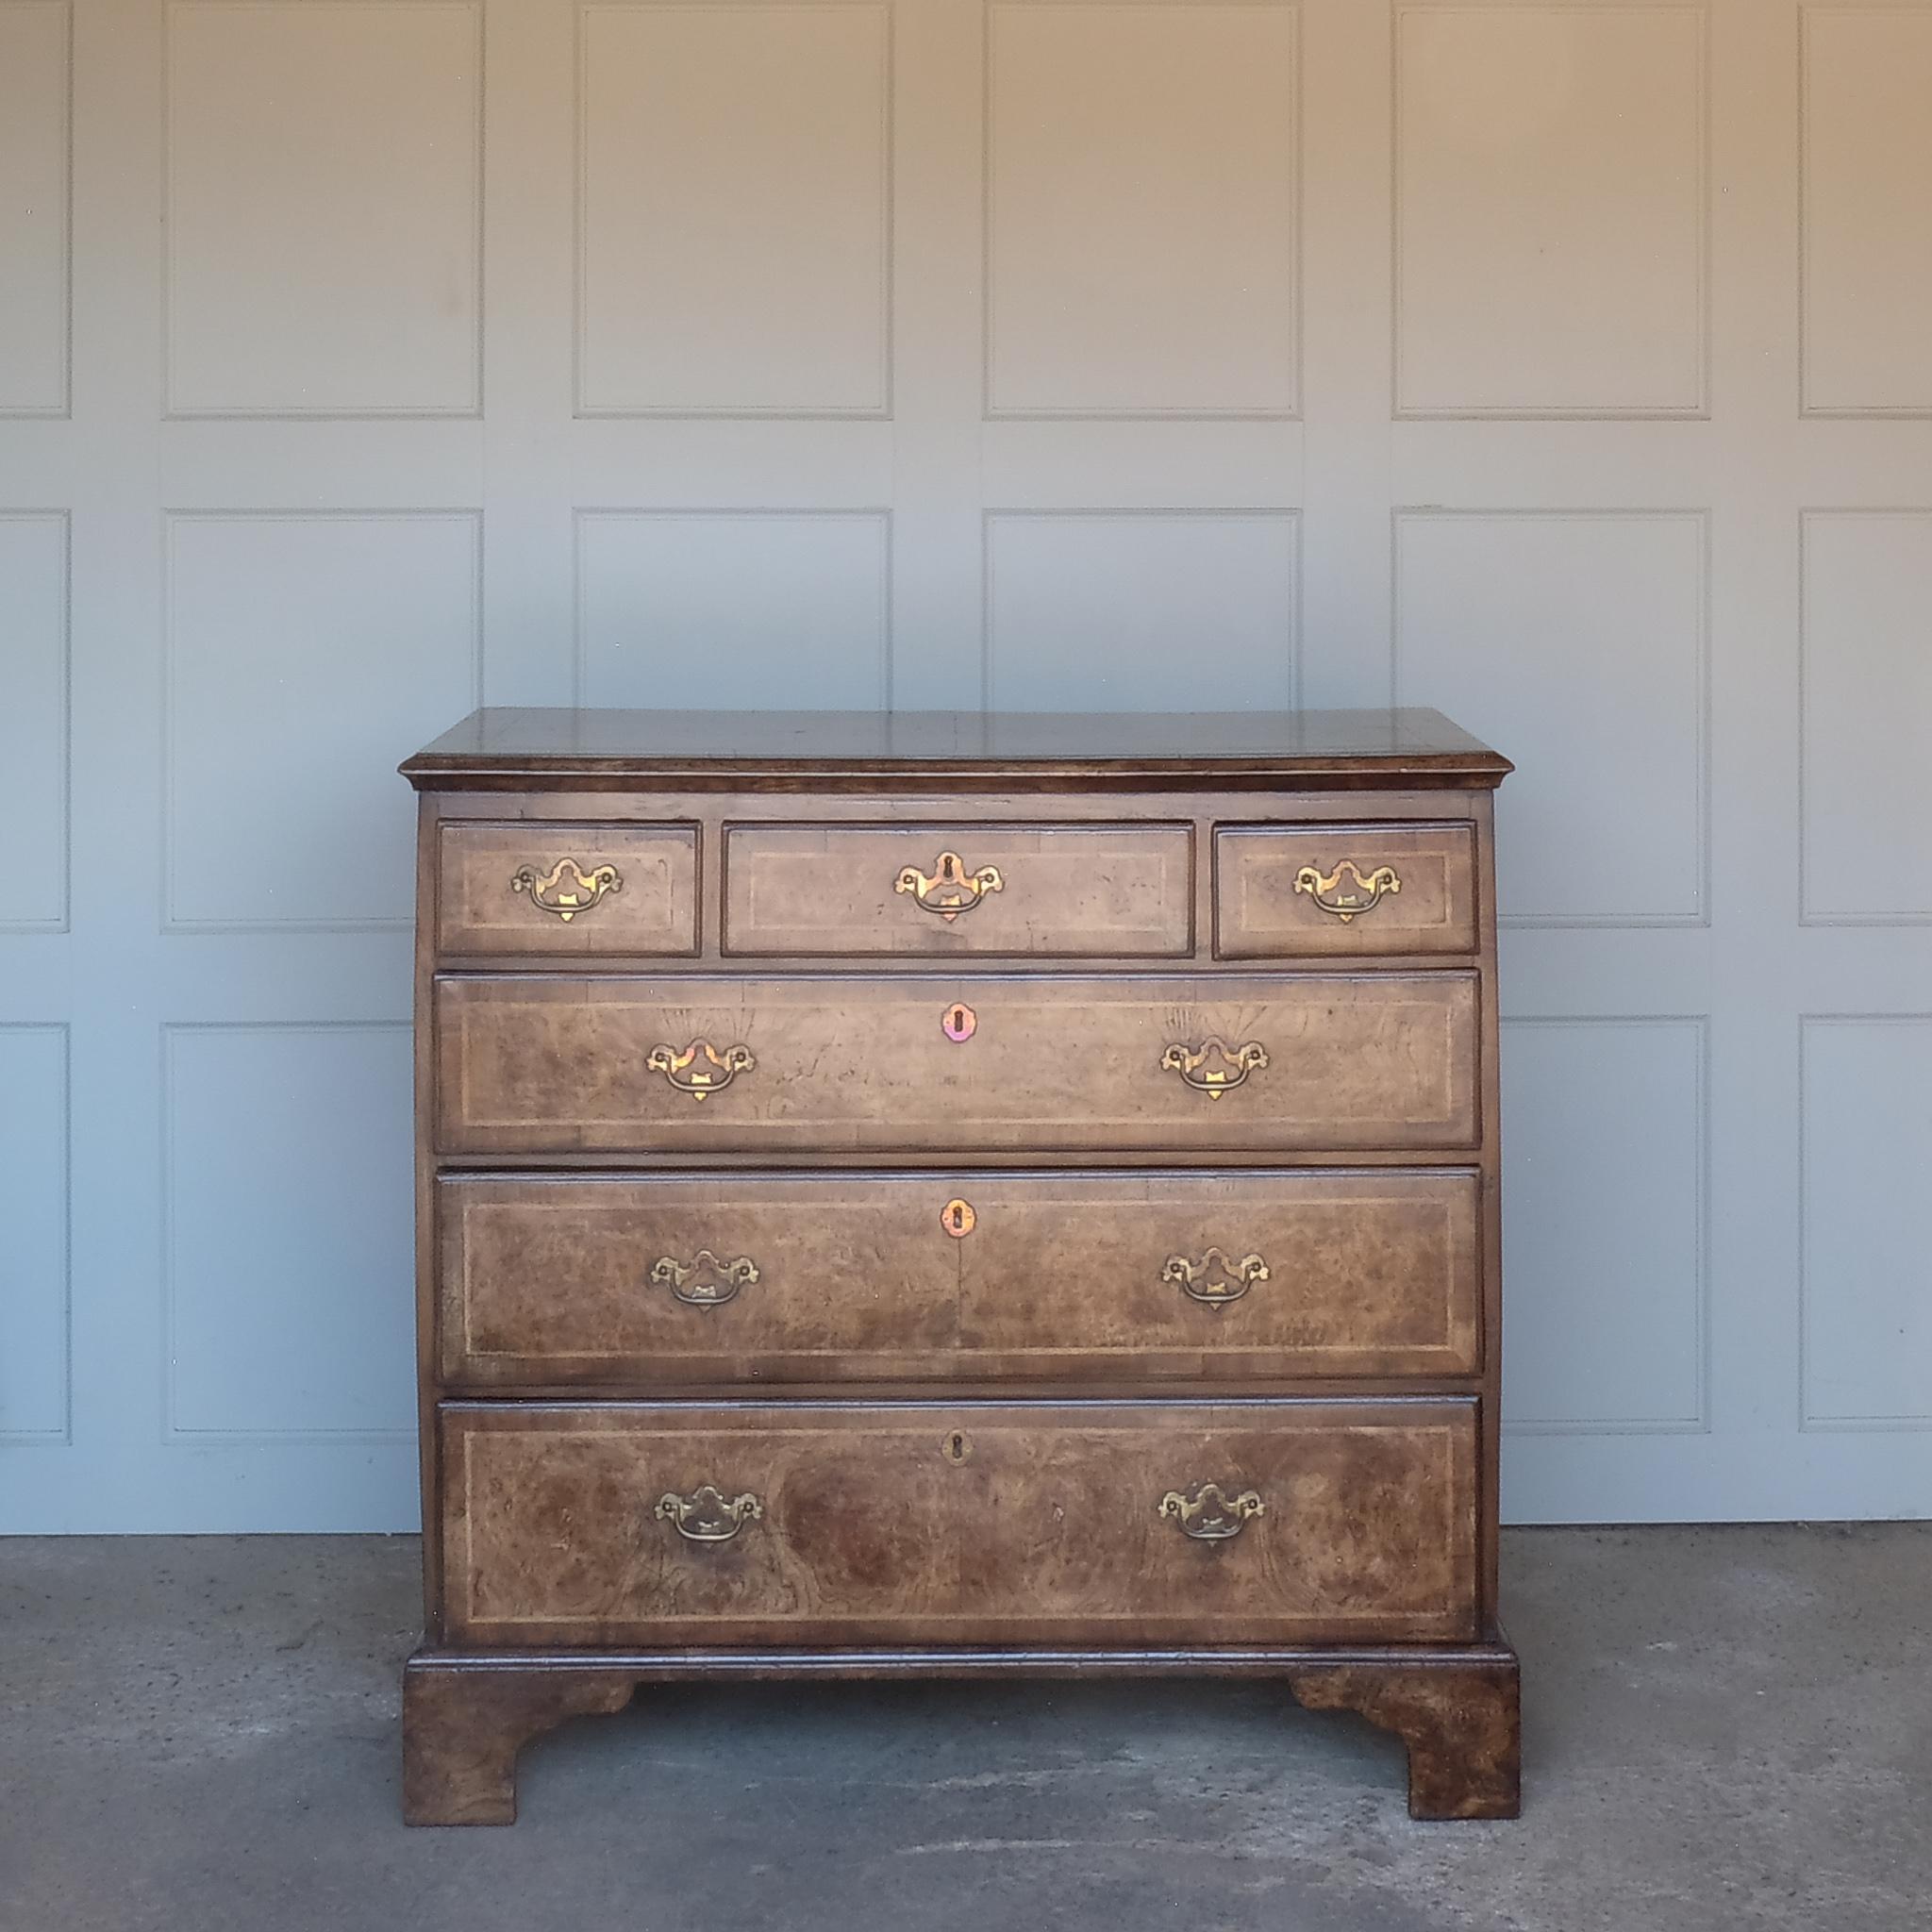 An interesting and rare elm and burr walnut crossbanded chest of drawers, dating from c. 1740, with a quarter veneered top and three short over three long drawers, raised on bracket feet. In very good condition with a beautiful historic patina